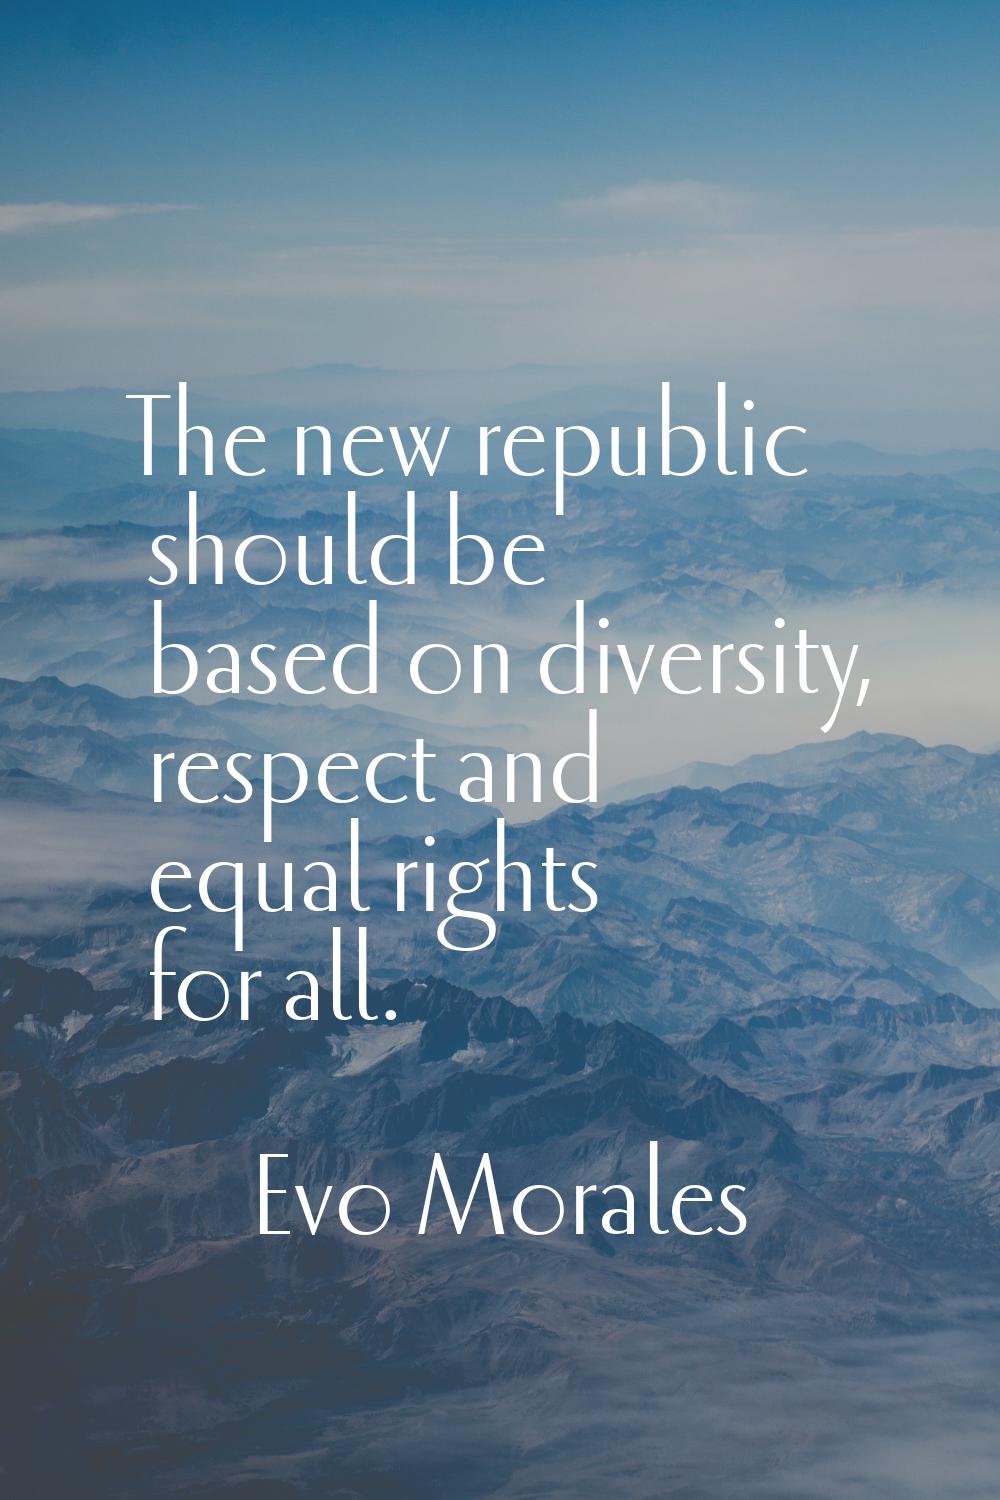 The new republic should be based on diversity, respect and equal rights for all.